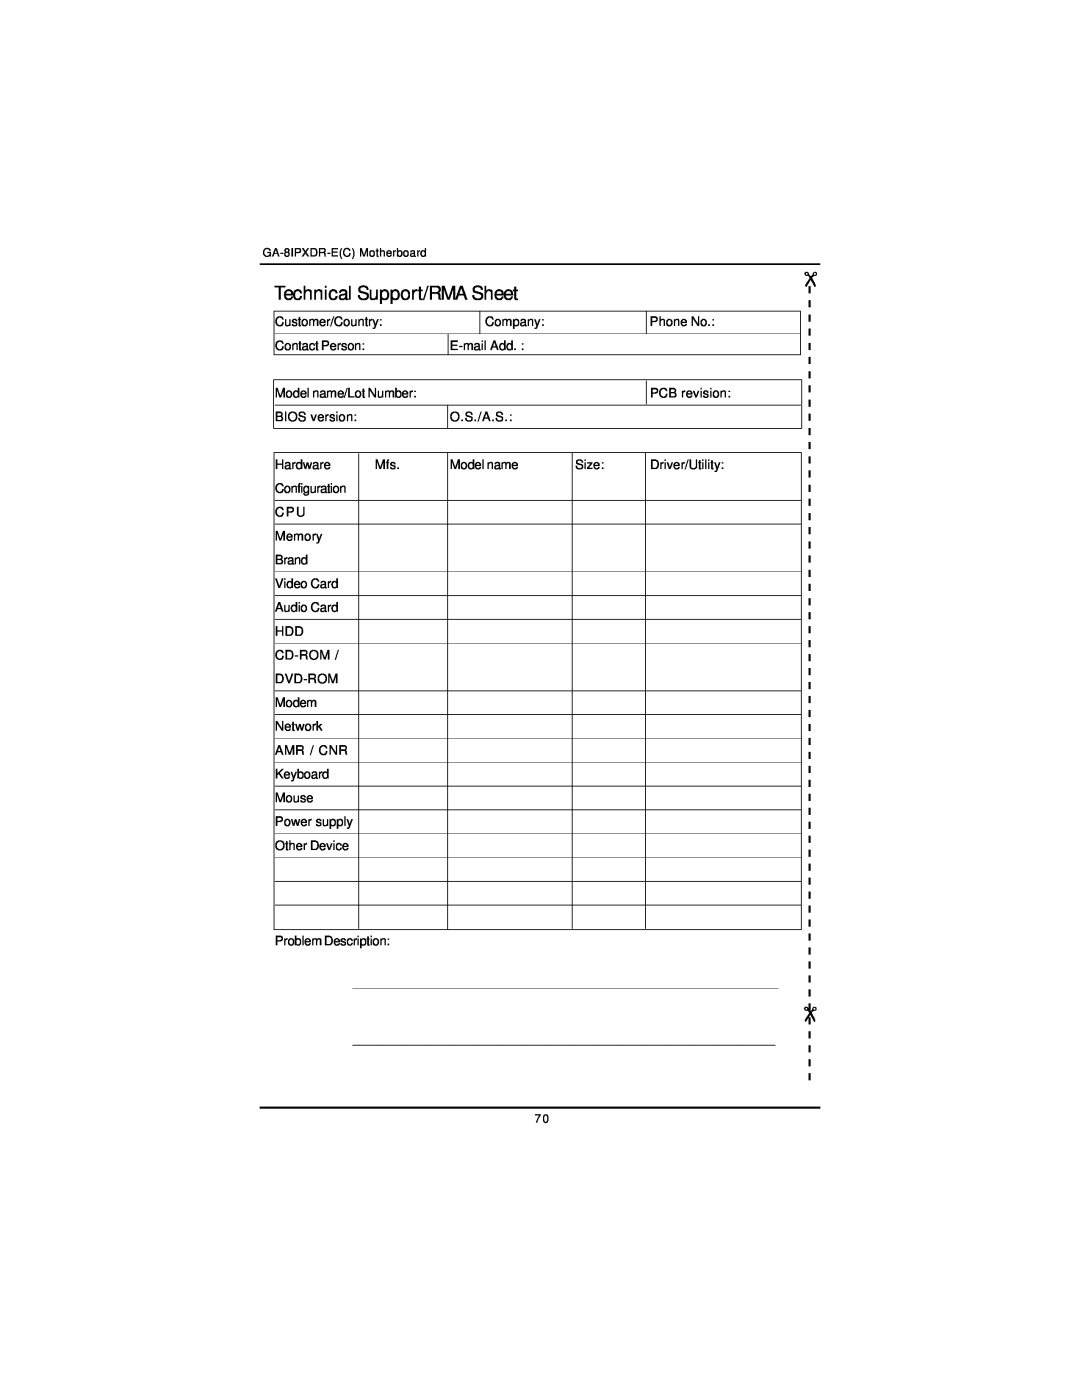 Intel GA-8IPXDR-E user manual Technical Support/RMA Sheet, Contact Person, Power supply, Other Device 